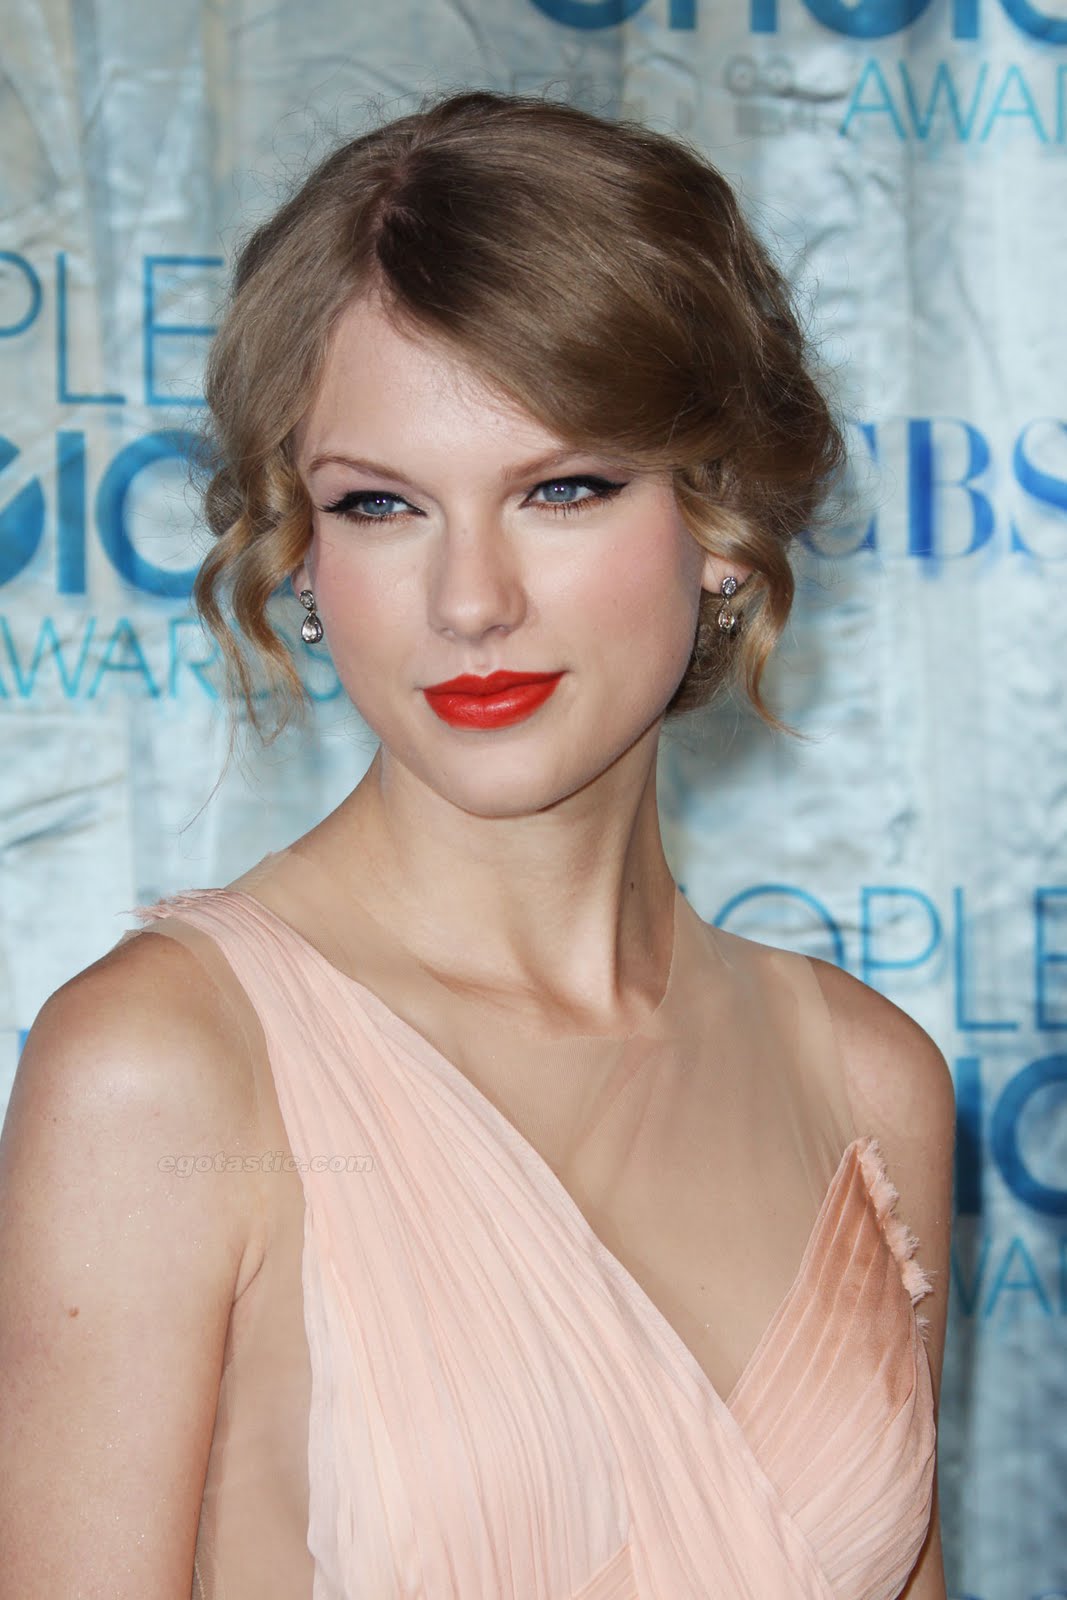 A new life hartz: Taylor Swift Hairstyle